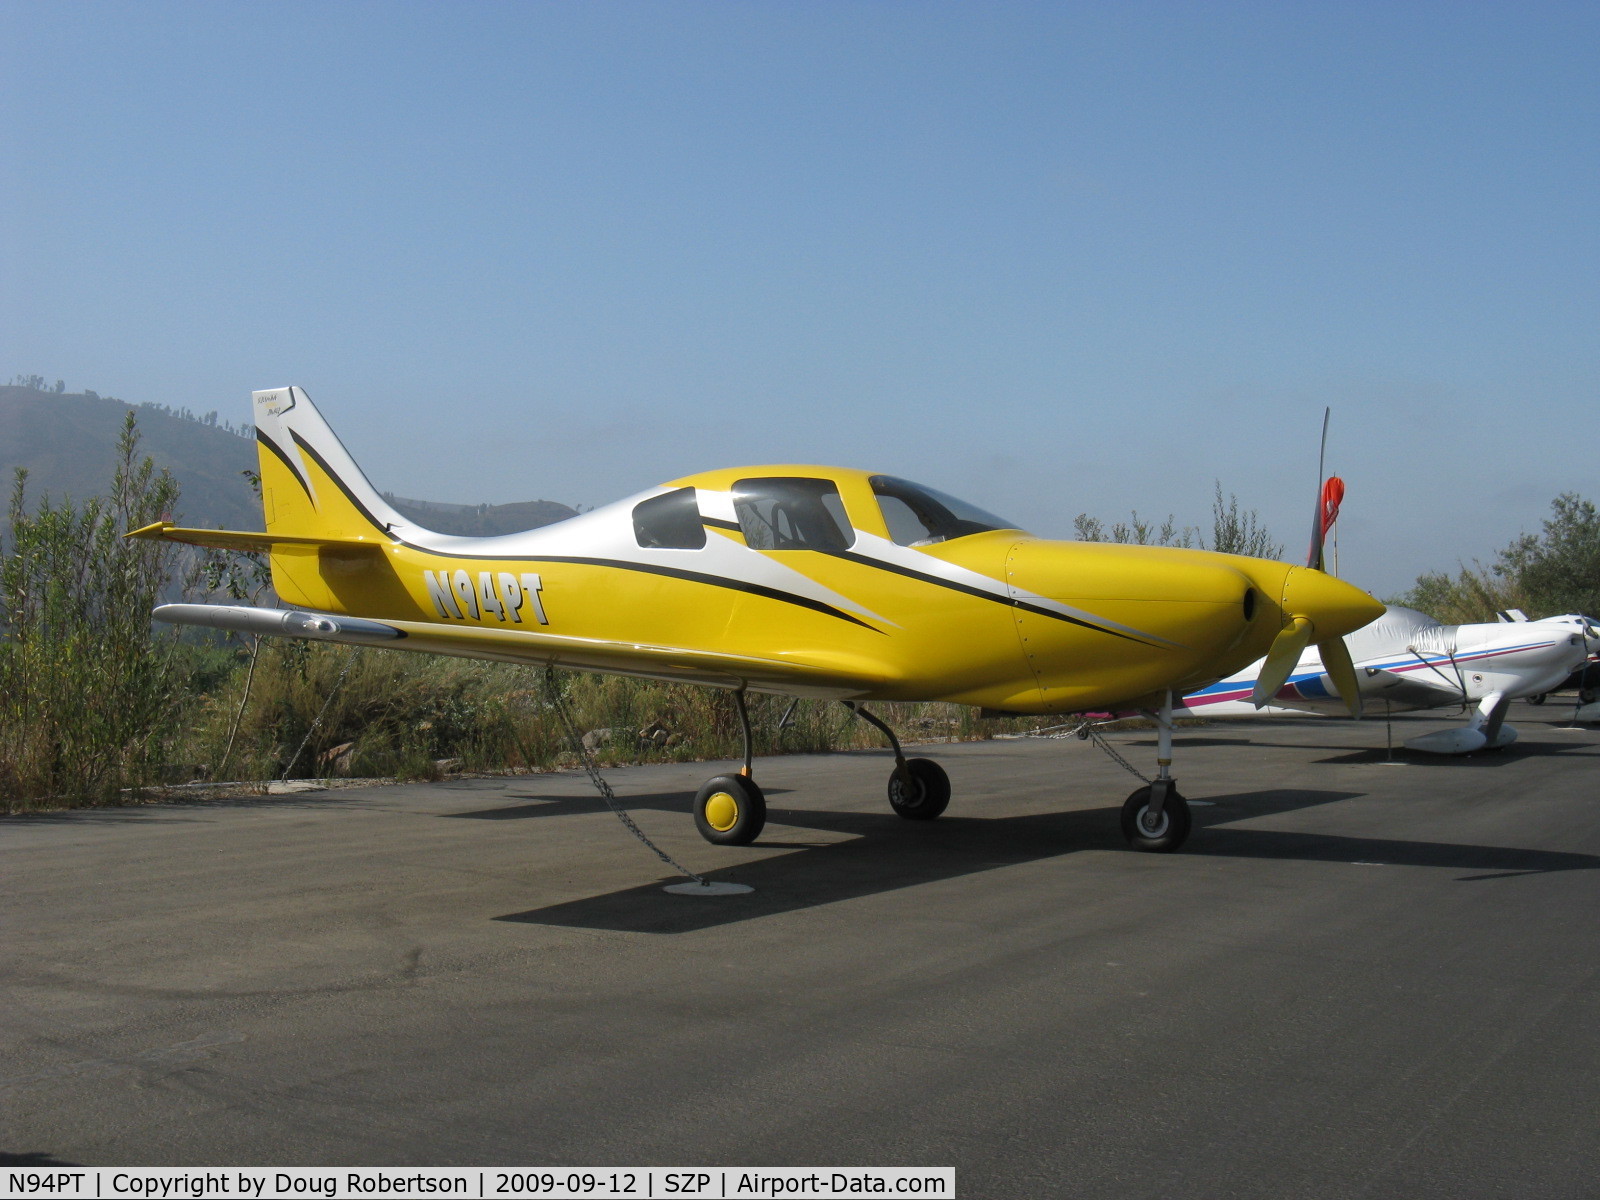 N94PT, 2006 Lancair IV C/N LIV-494, 2006 Tackabury LANCAIR IV, Continental TSIO-550 350 Hp, Light Speed Engrg. plasma ignition, CS 3-blade prop, retractible gear, glass panel, dual side stick control. The Screaming Yellow Zonker won the EAA Cross-Country Race-AirVenture 2008.